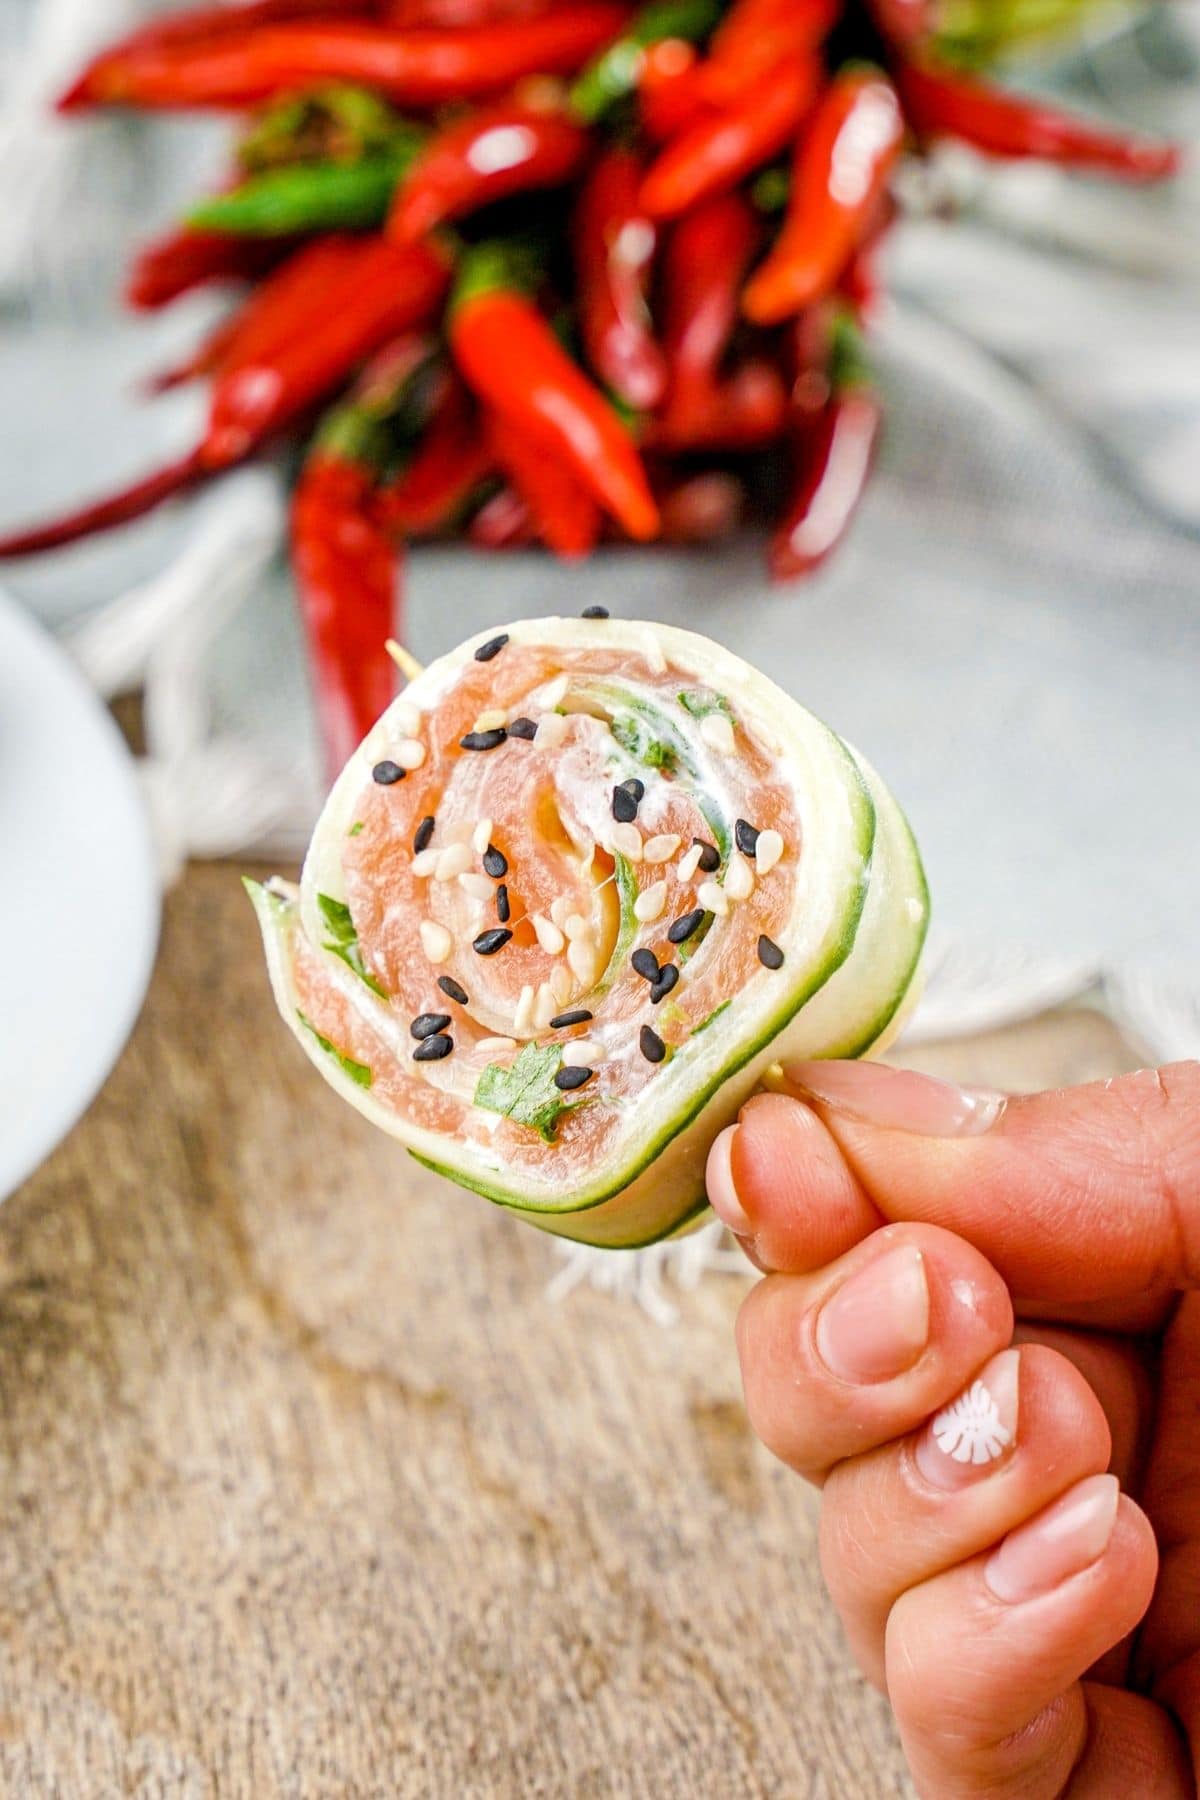 Hand holding single cucumber sushi roll by toothpick above table with red peppers in background